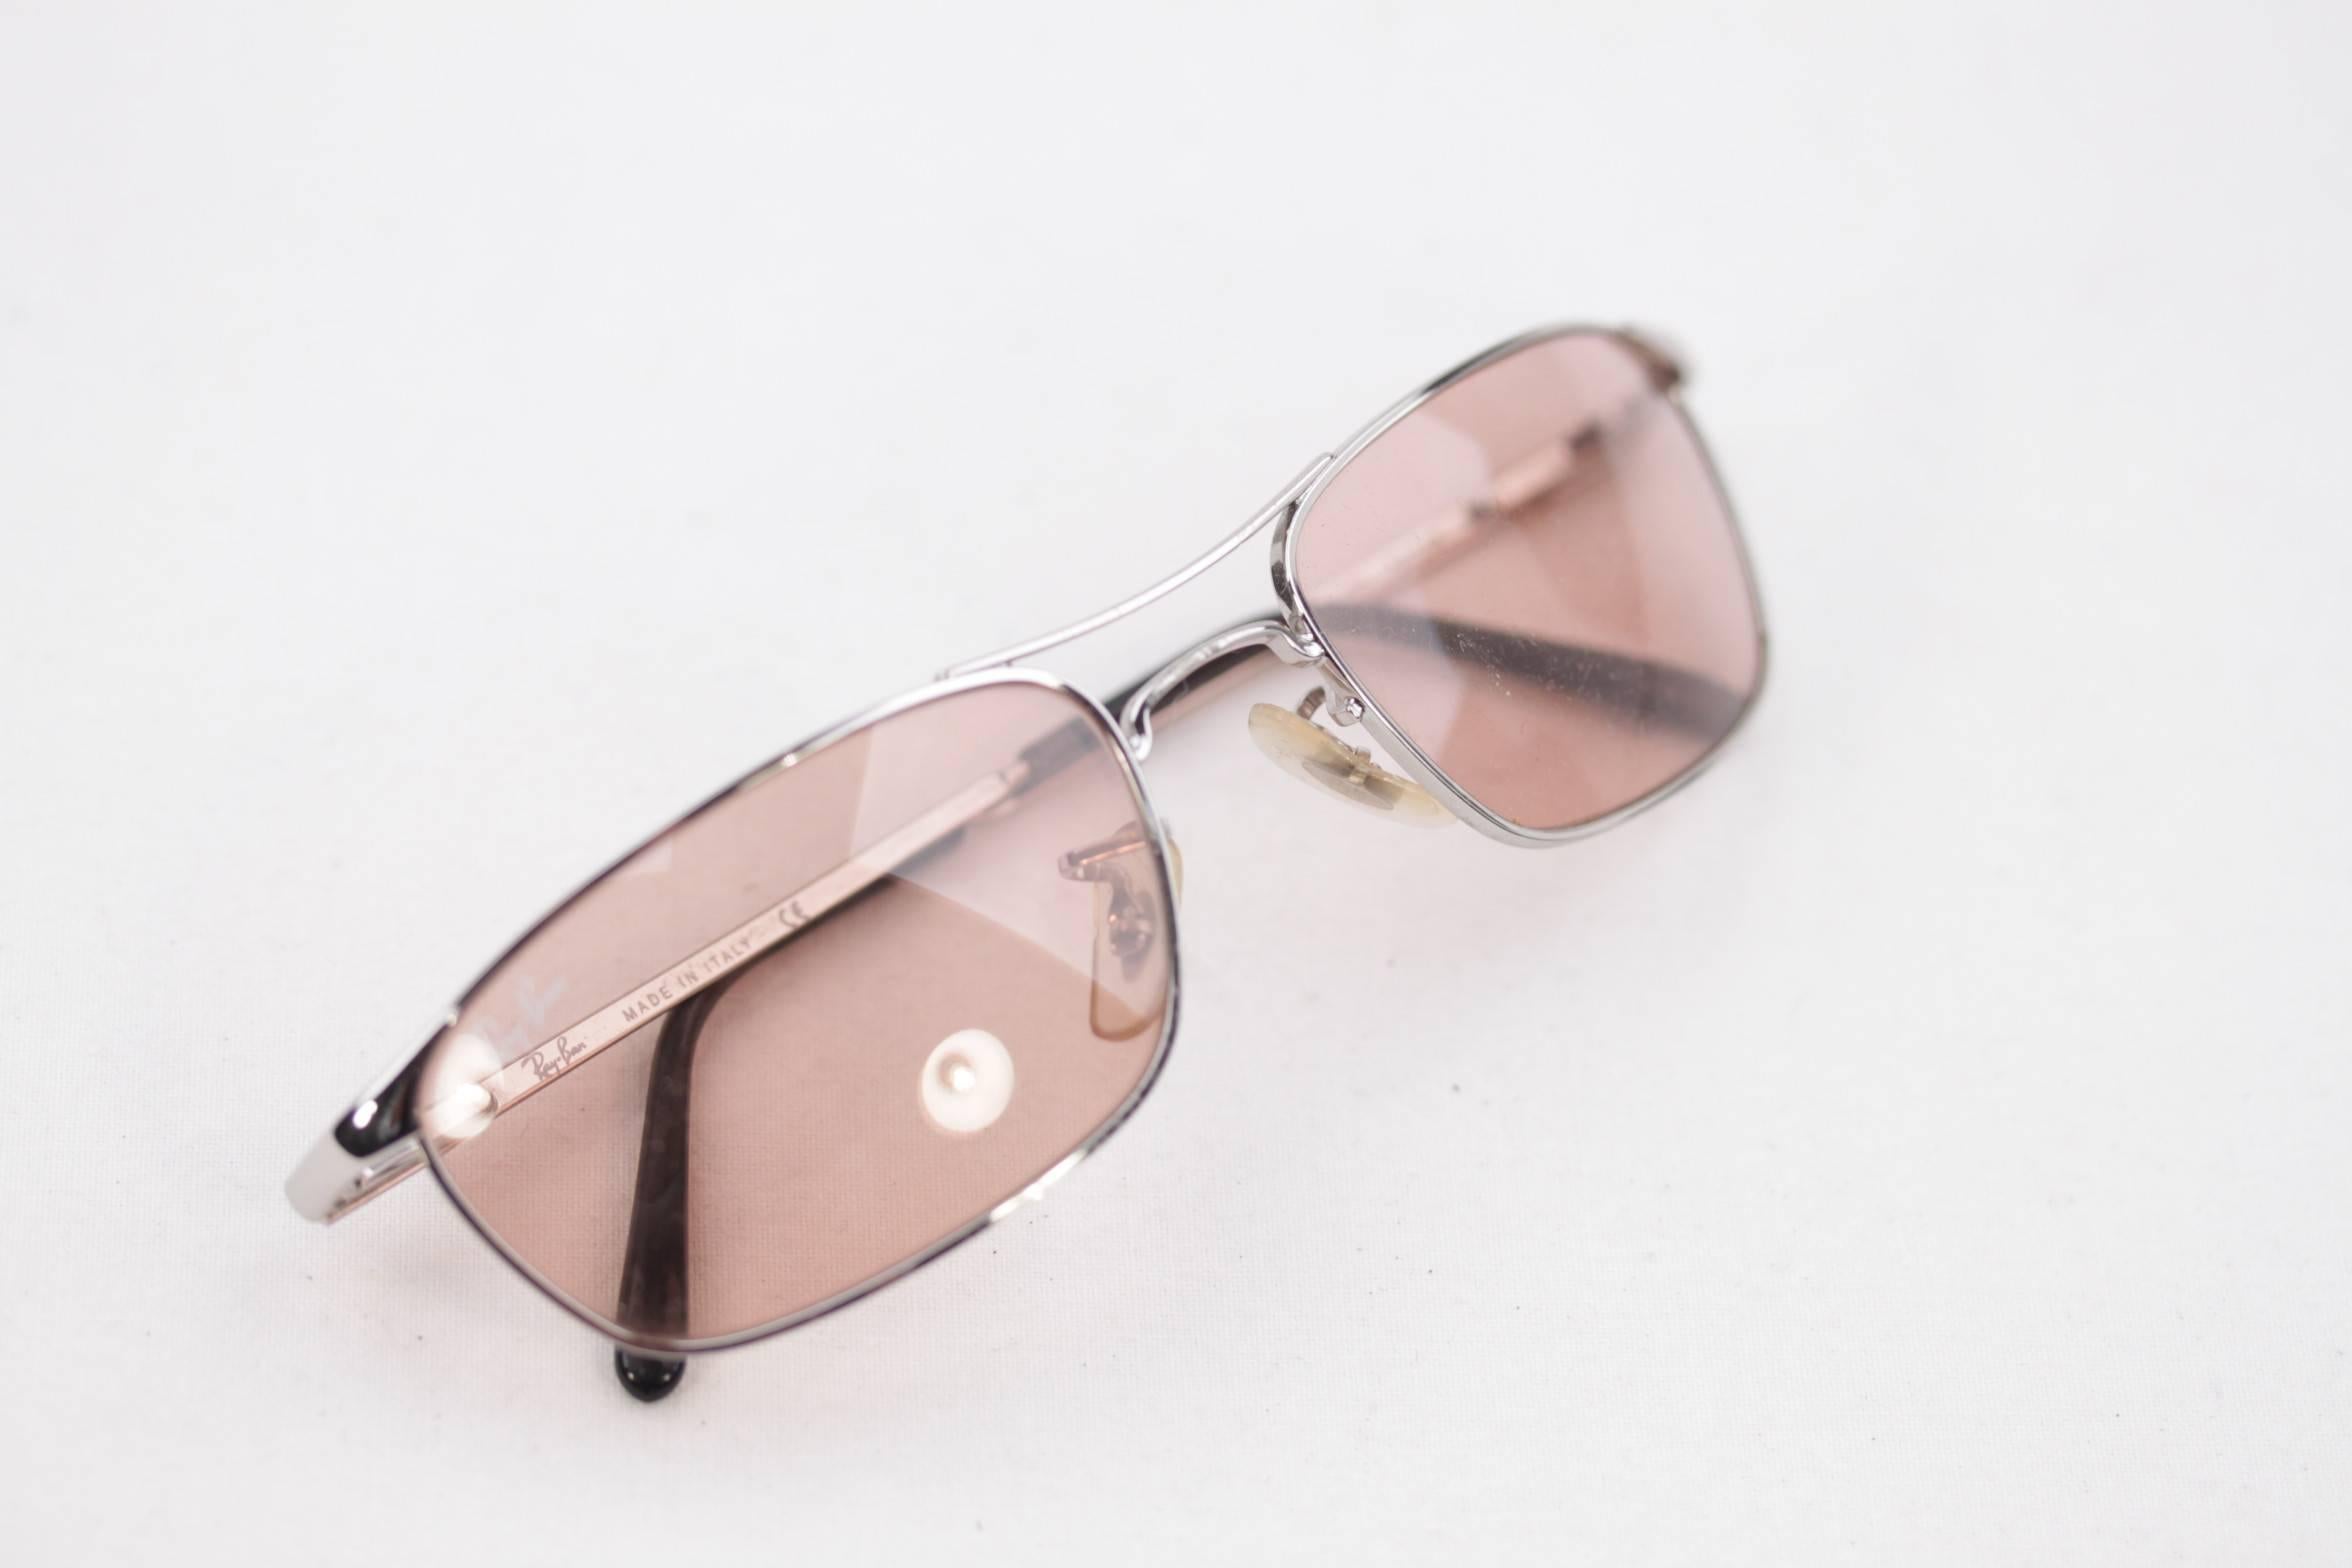 RAY-BAN Silver Metal MINT unisex SUNGLASSES RB3132 003/50 54mm Pink Lens 1